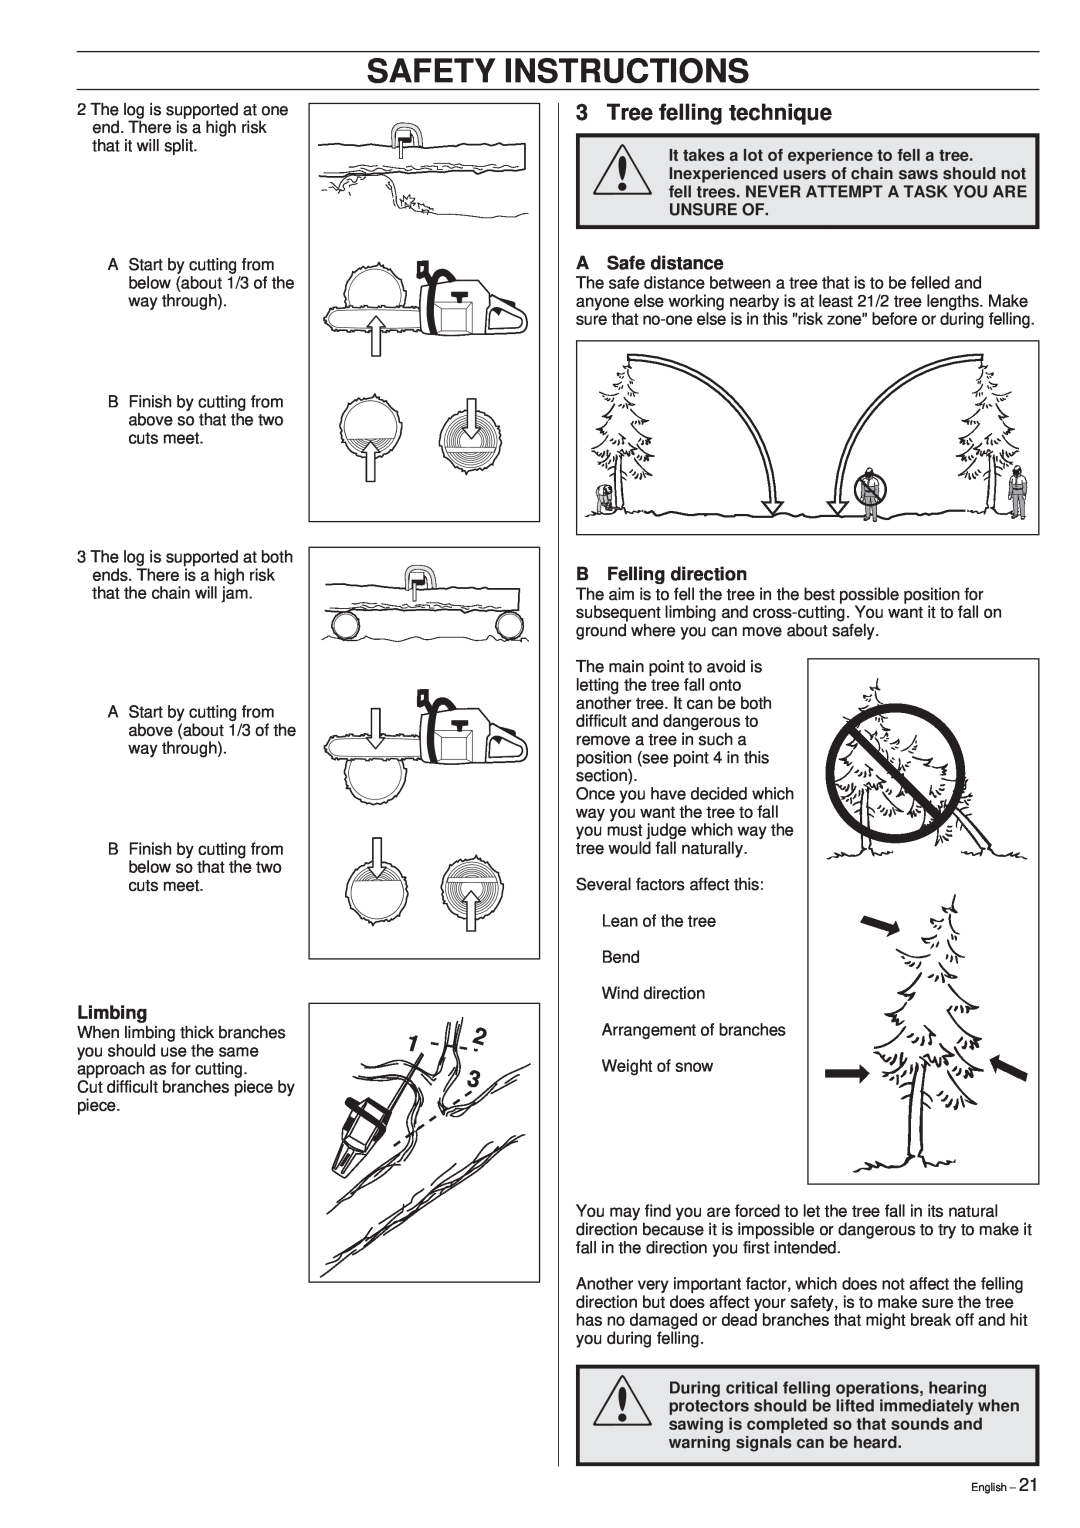 Husqvarna 45 manual Safety Instructions, 3Tree felling technique, A Safe distance, Limbing, B Felling direction 